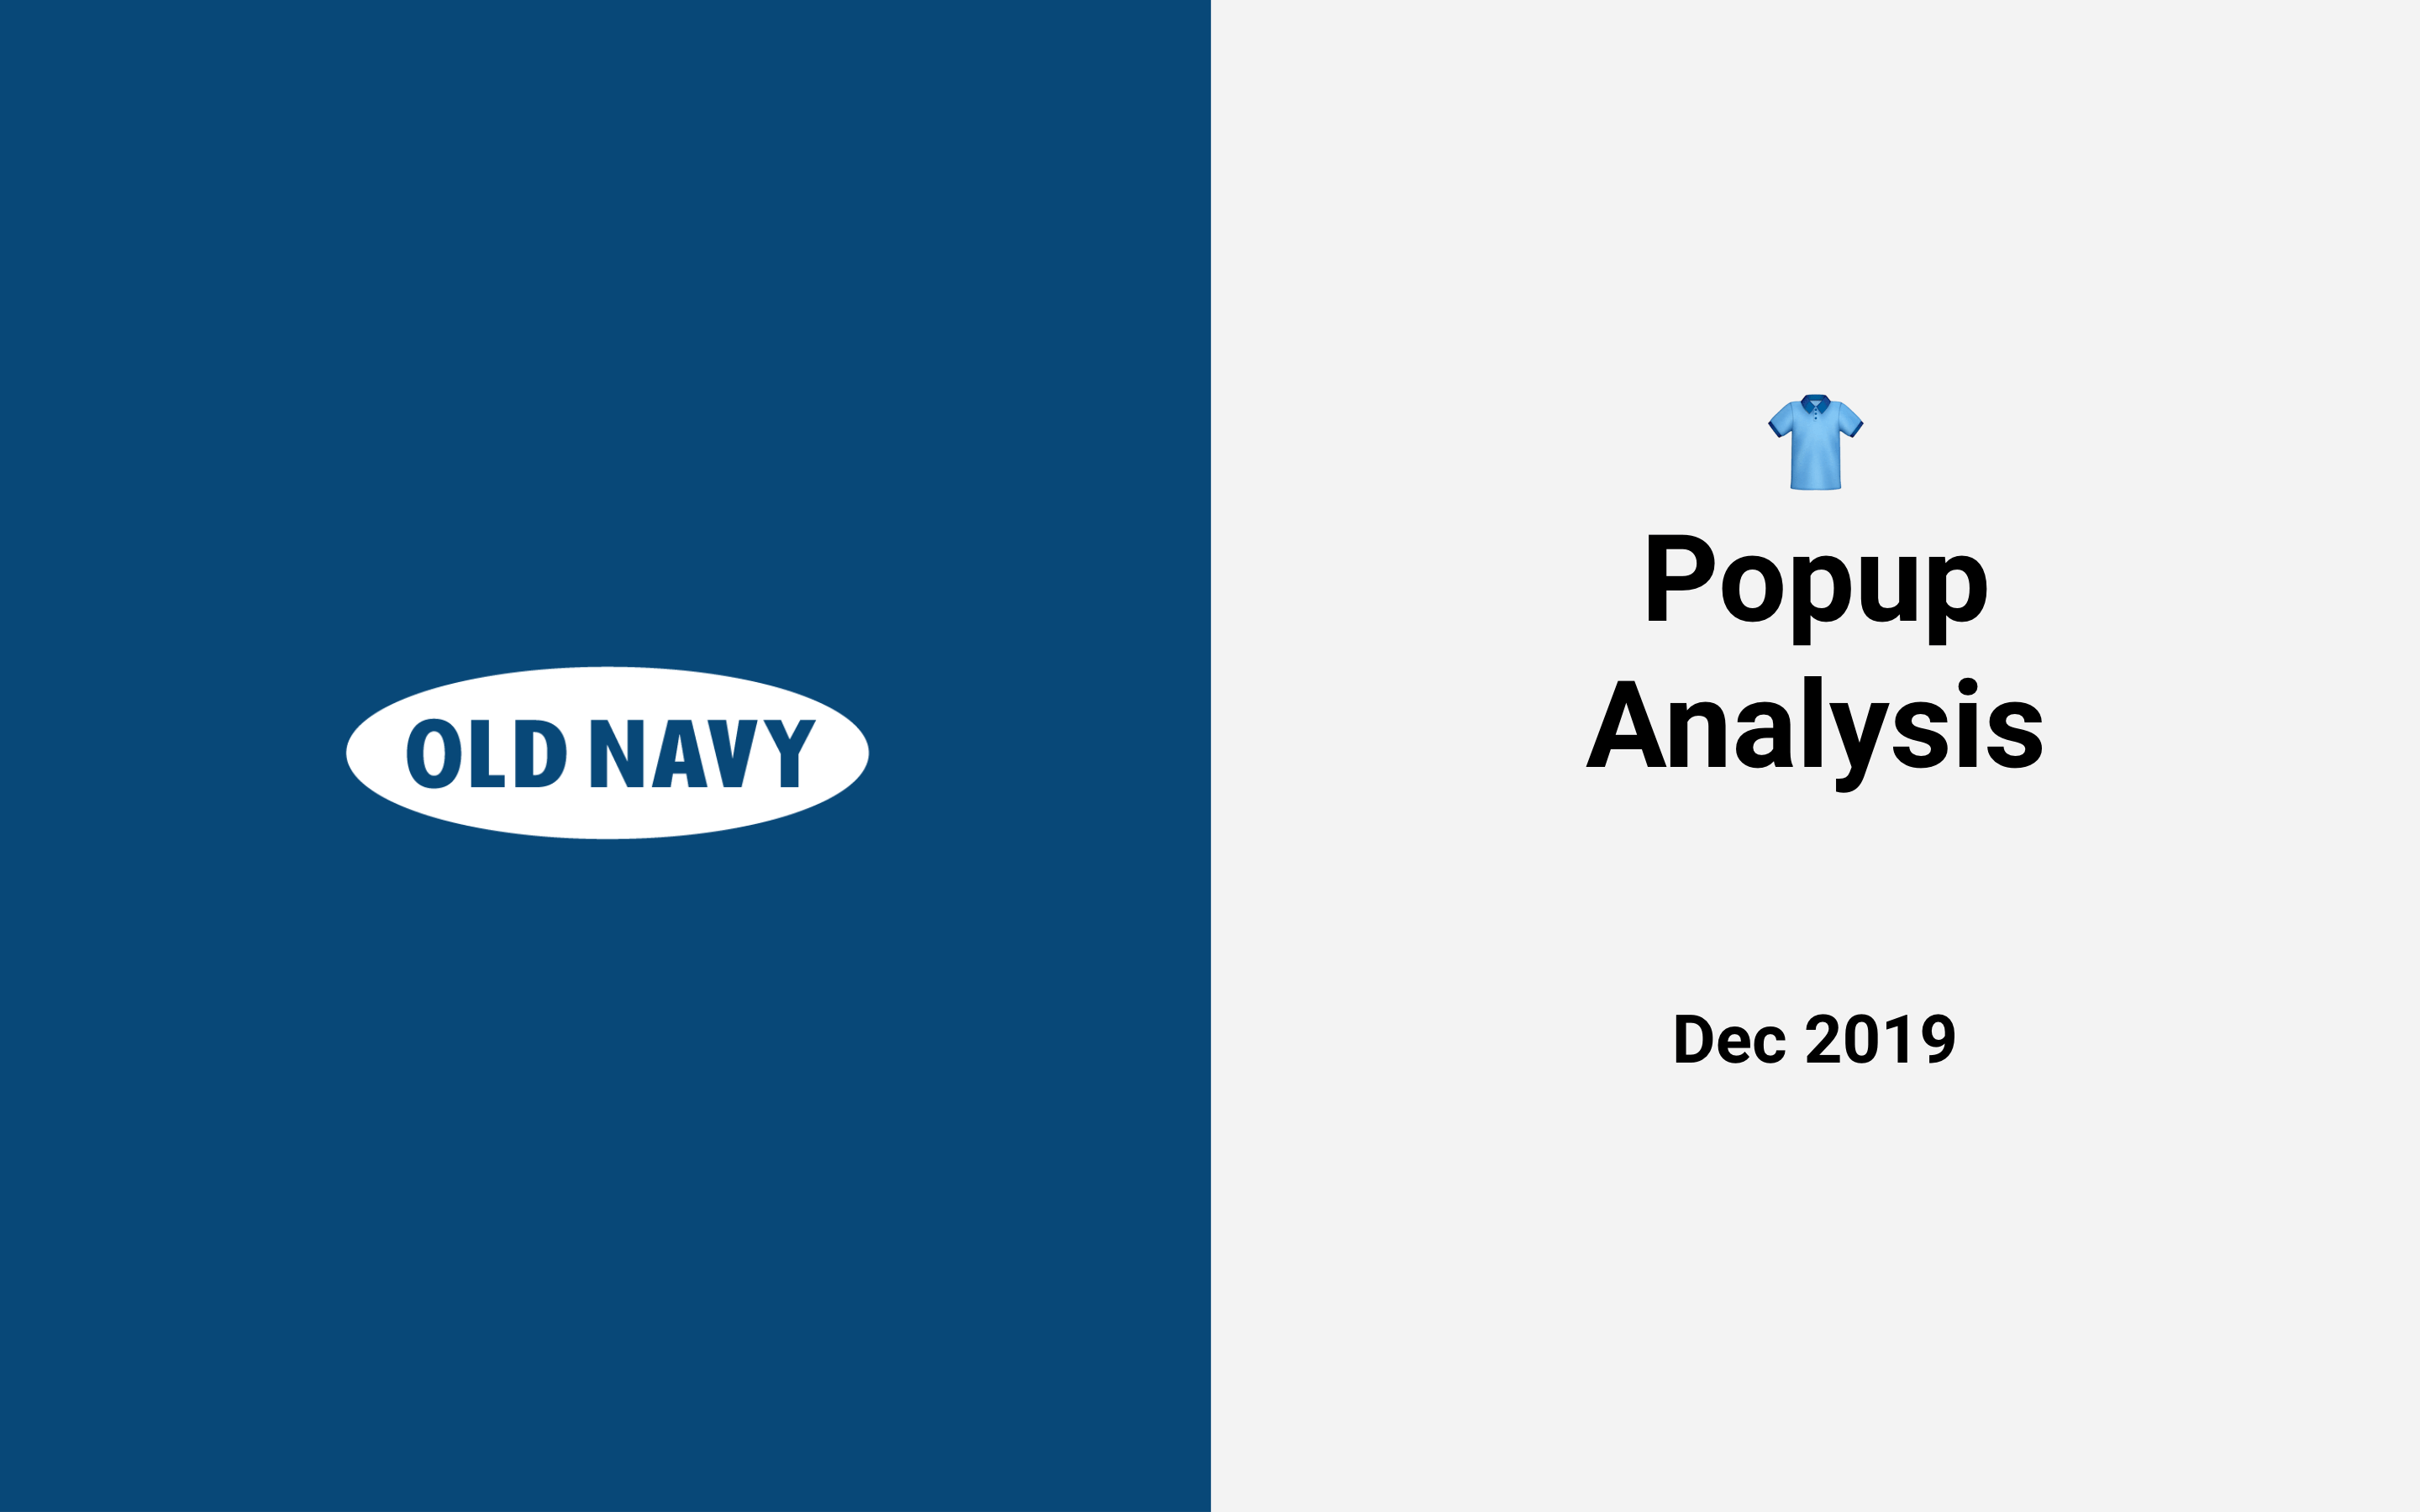 How does Old Navy's online store use popups?